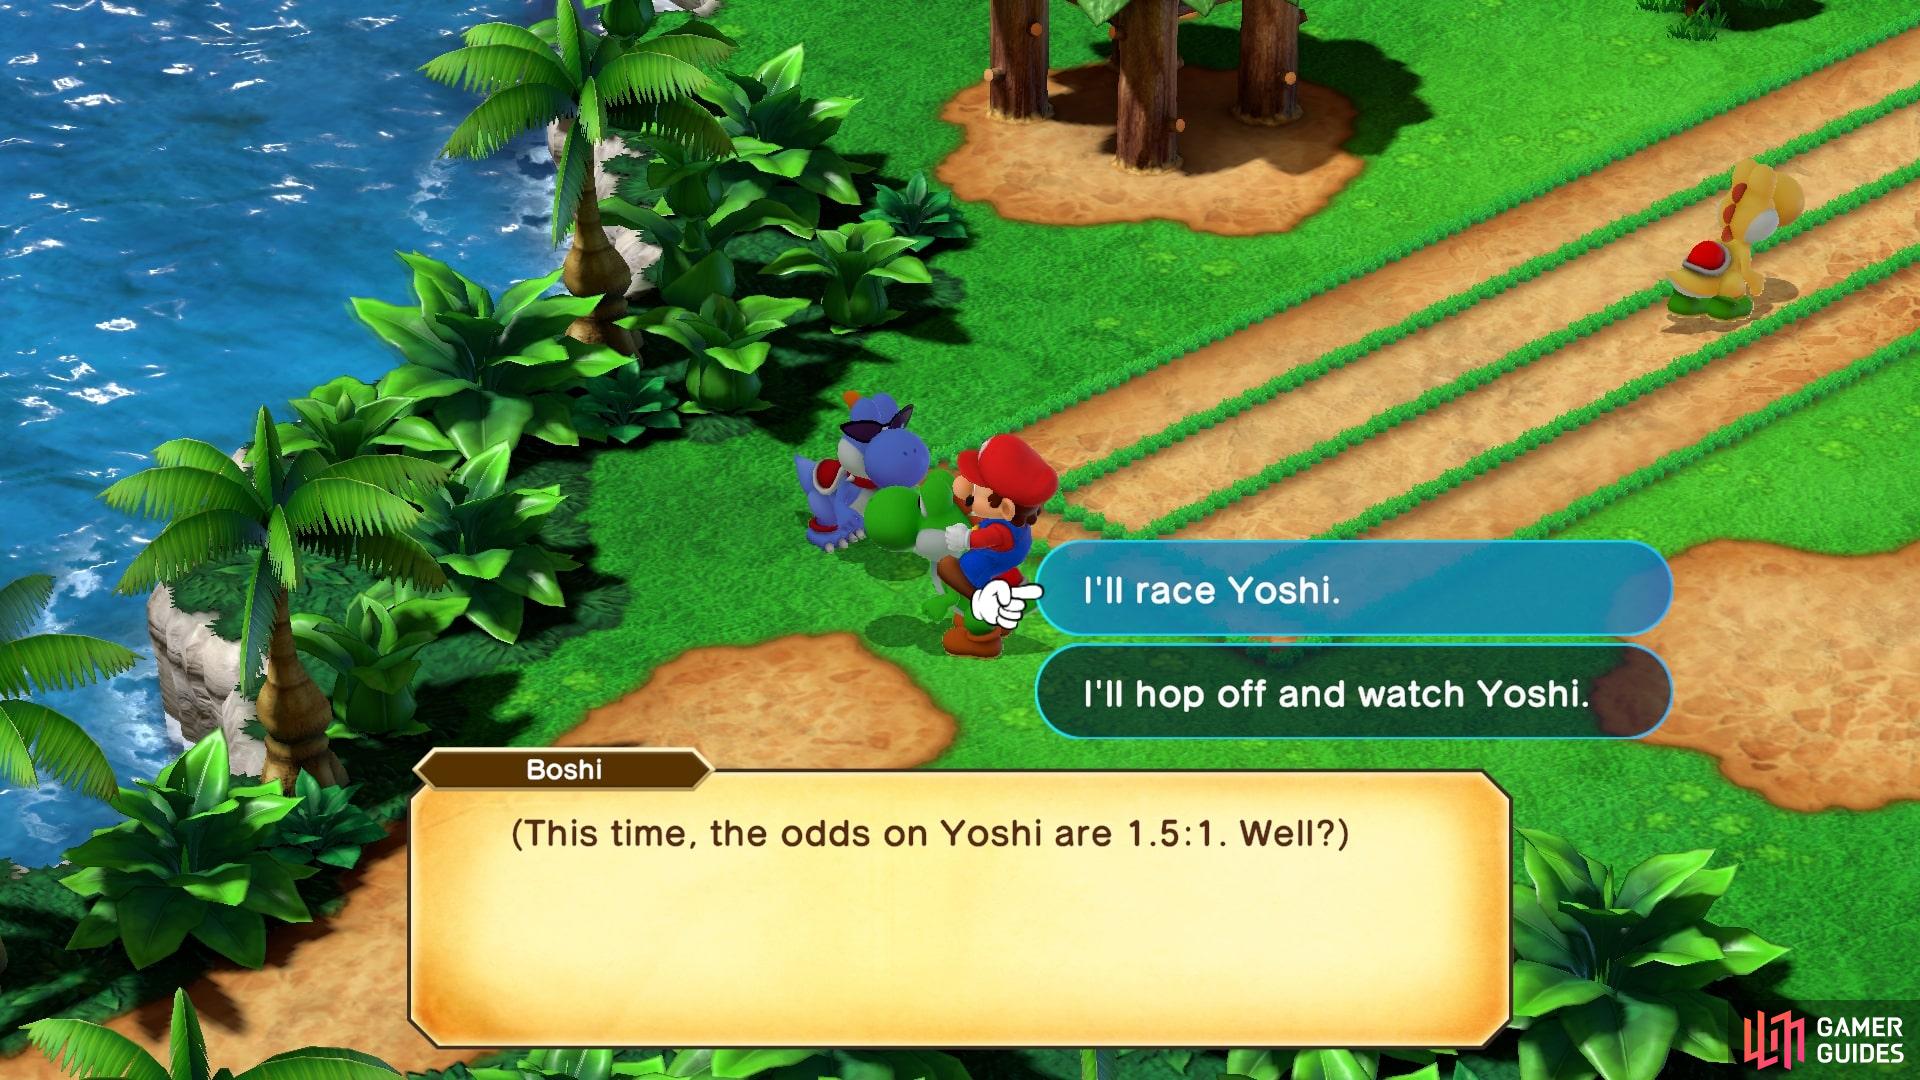 You can challenge Boshi at any time while actively riding Yoshi.